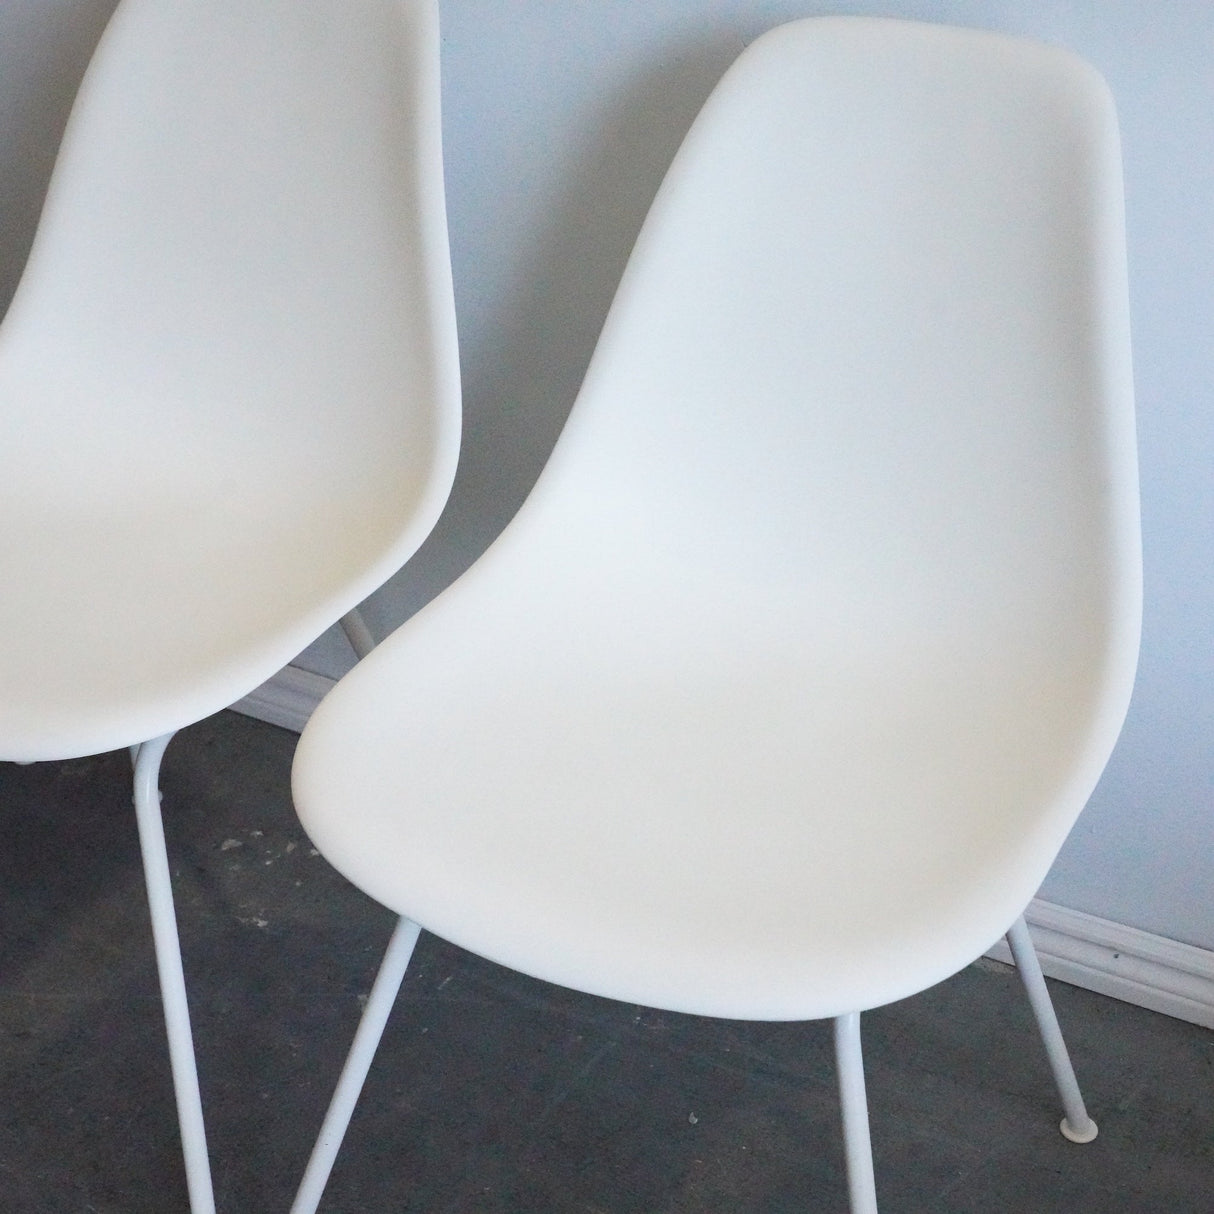 Authentic Herman Miller Eames Plastic dining chair - enliven mart